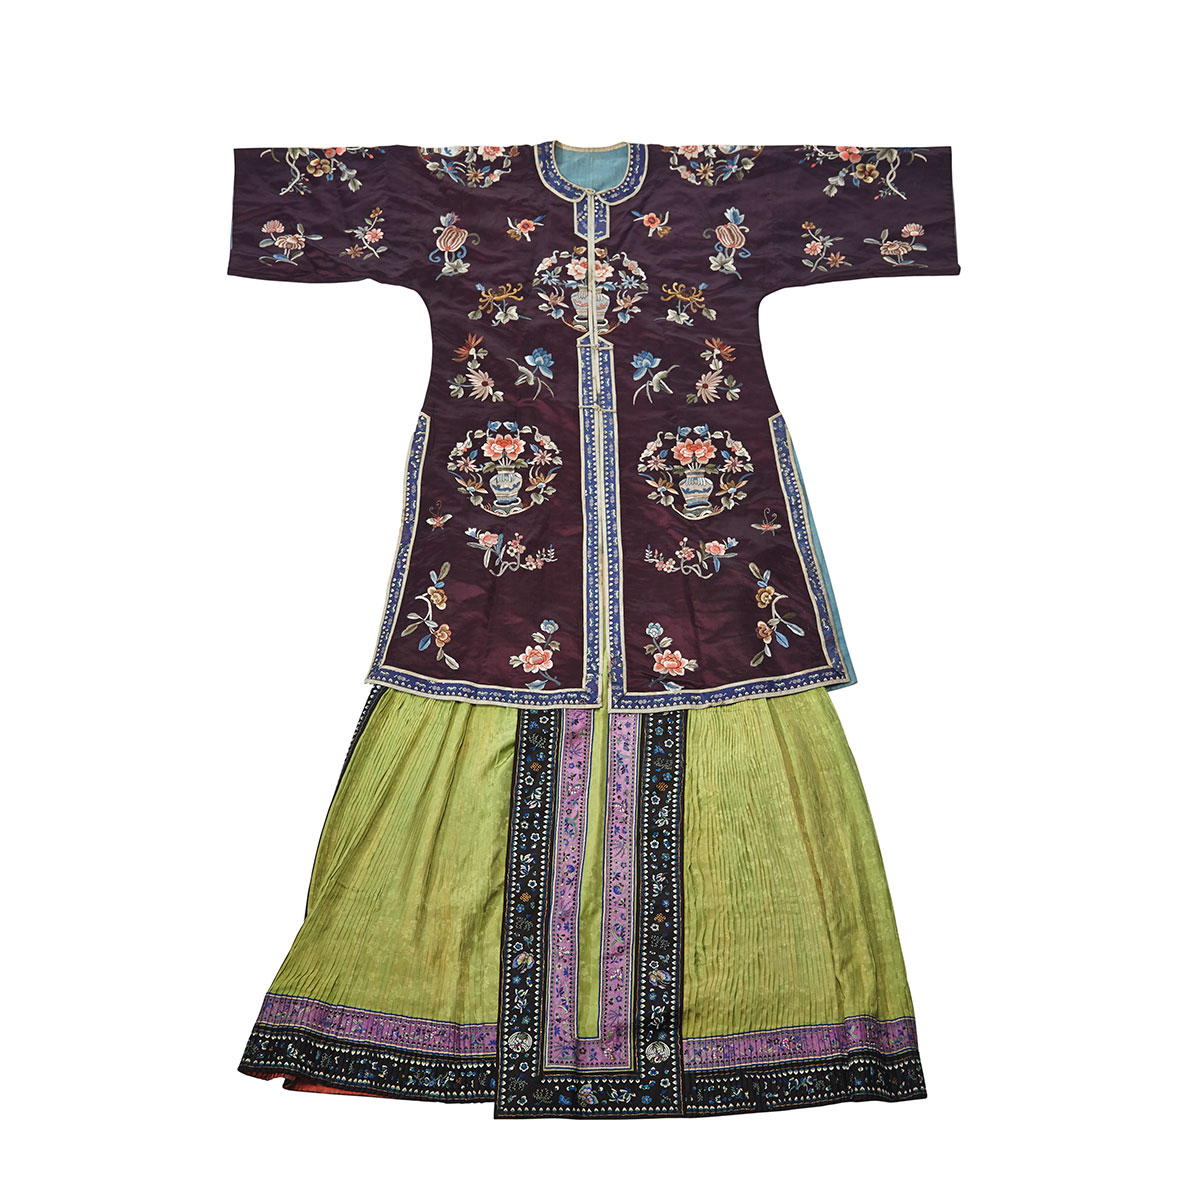 Purple Silk Ground Lady’s Informal Jacket and Lime-Green Skirt, Early 20th Century